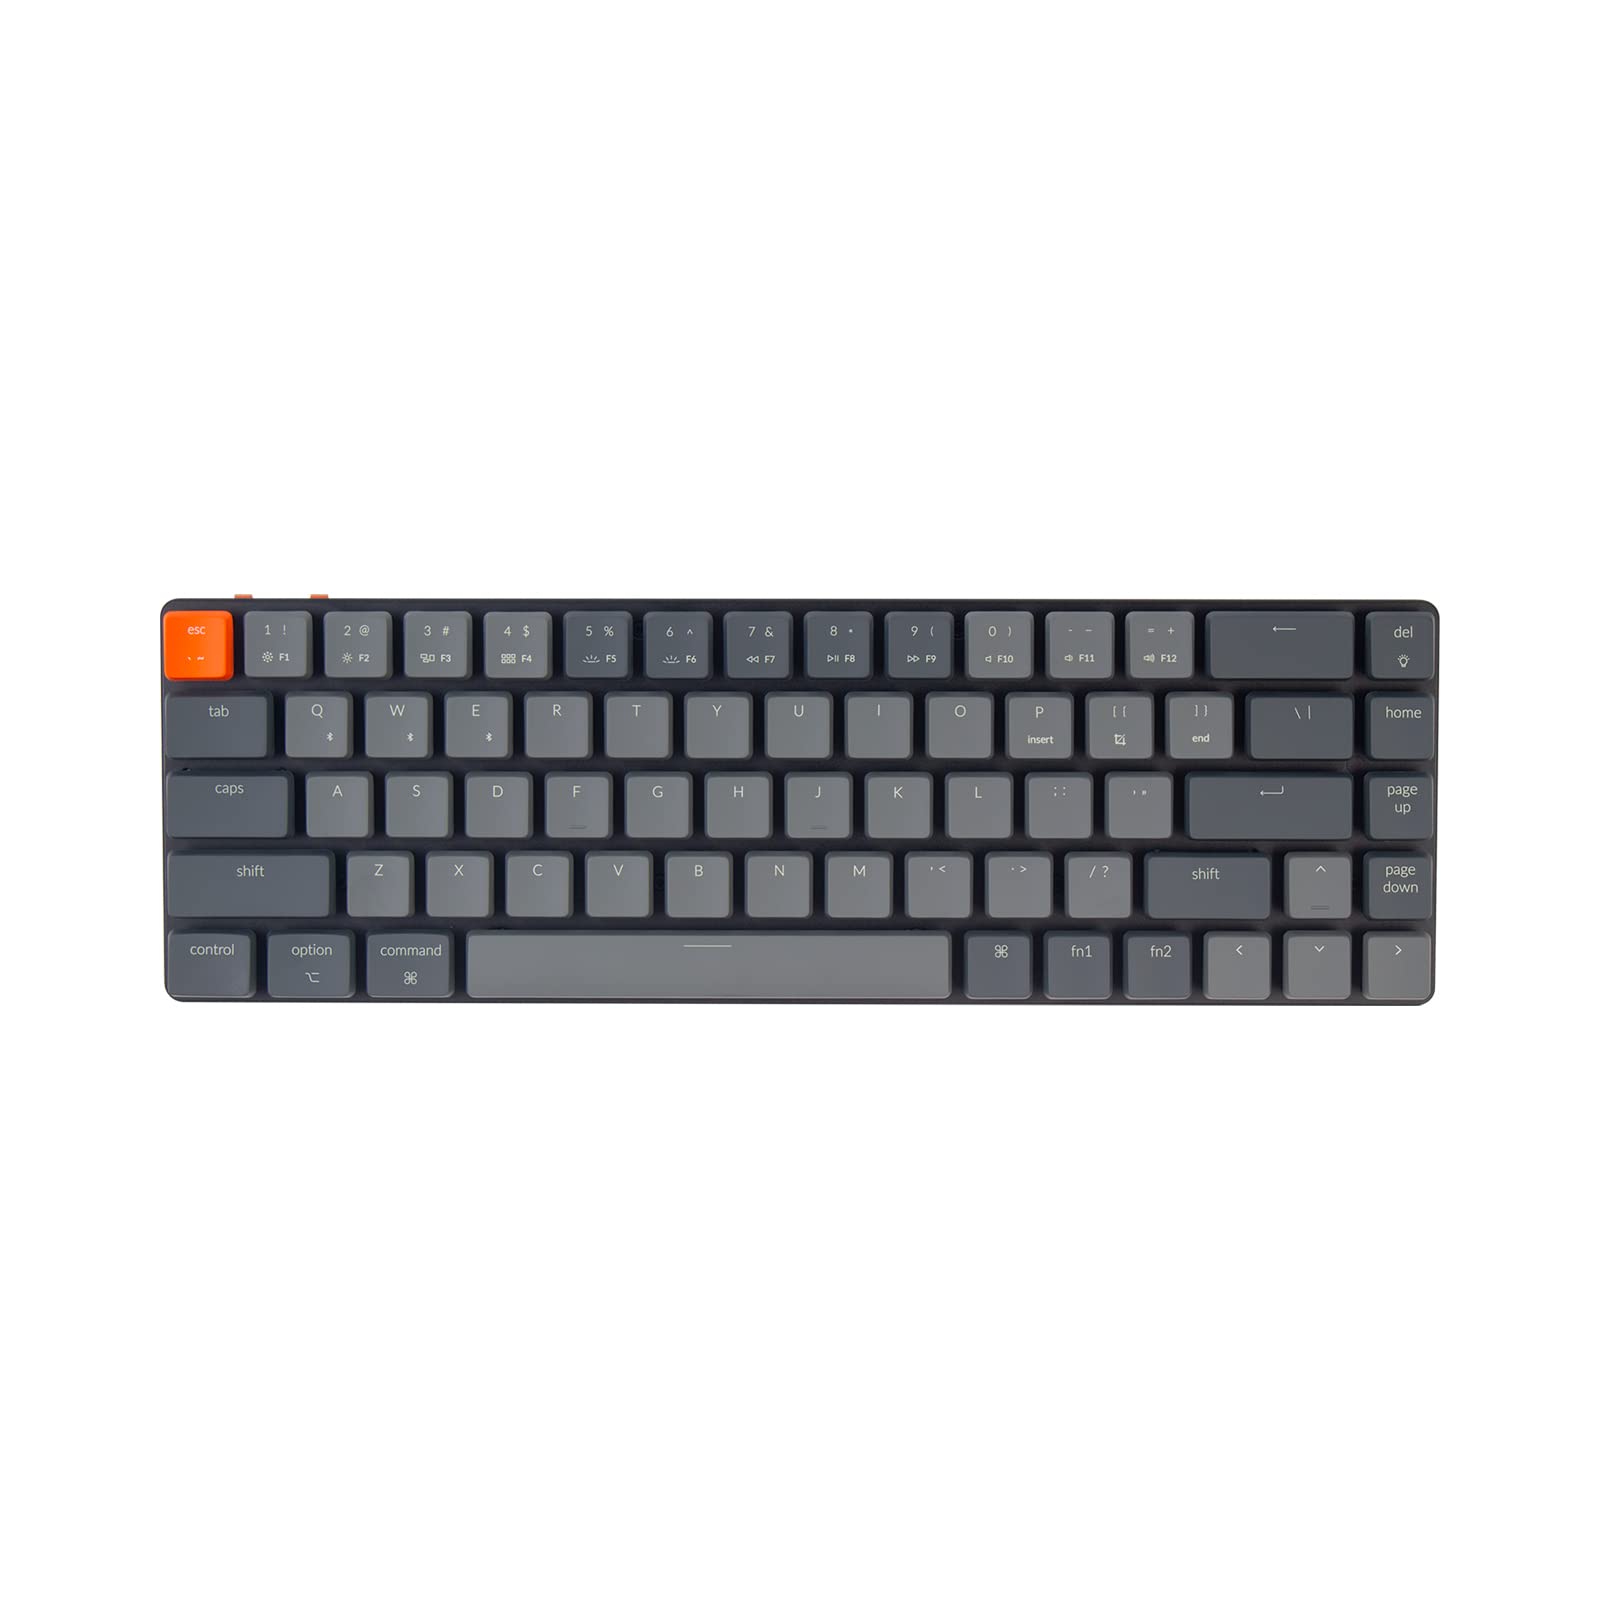 Keychron K7, 68 Keys Ultra-Slim Wireless Bluetooth/Wired Mechanical Keyboard with Low-Profile Gateron Mechanical Brown Switch, White LED Backlit Compatible with Mac Windows